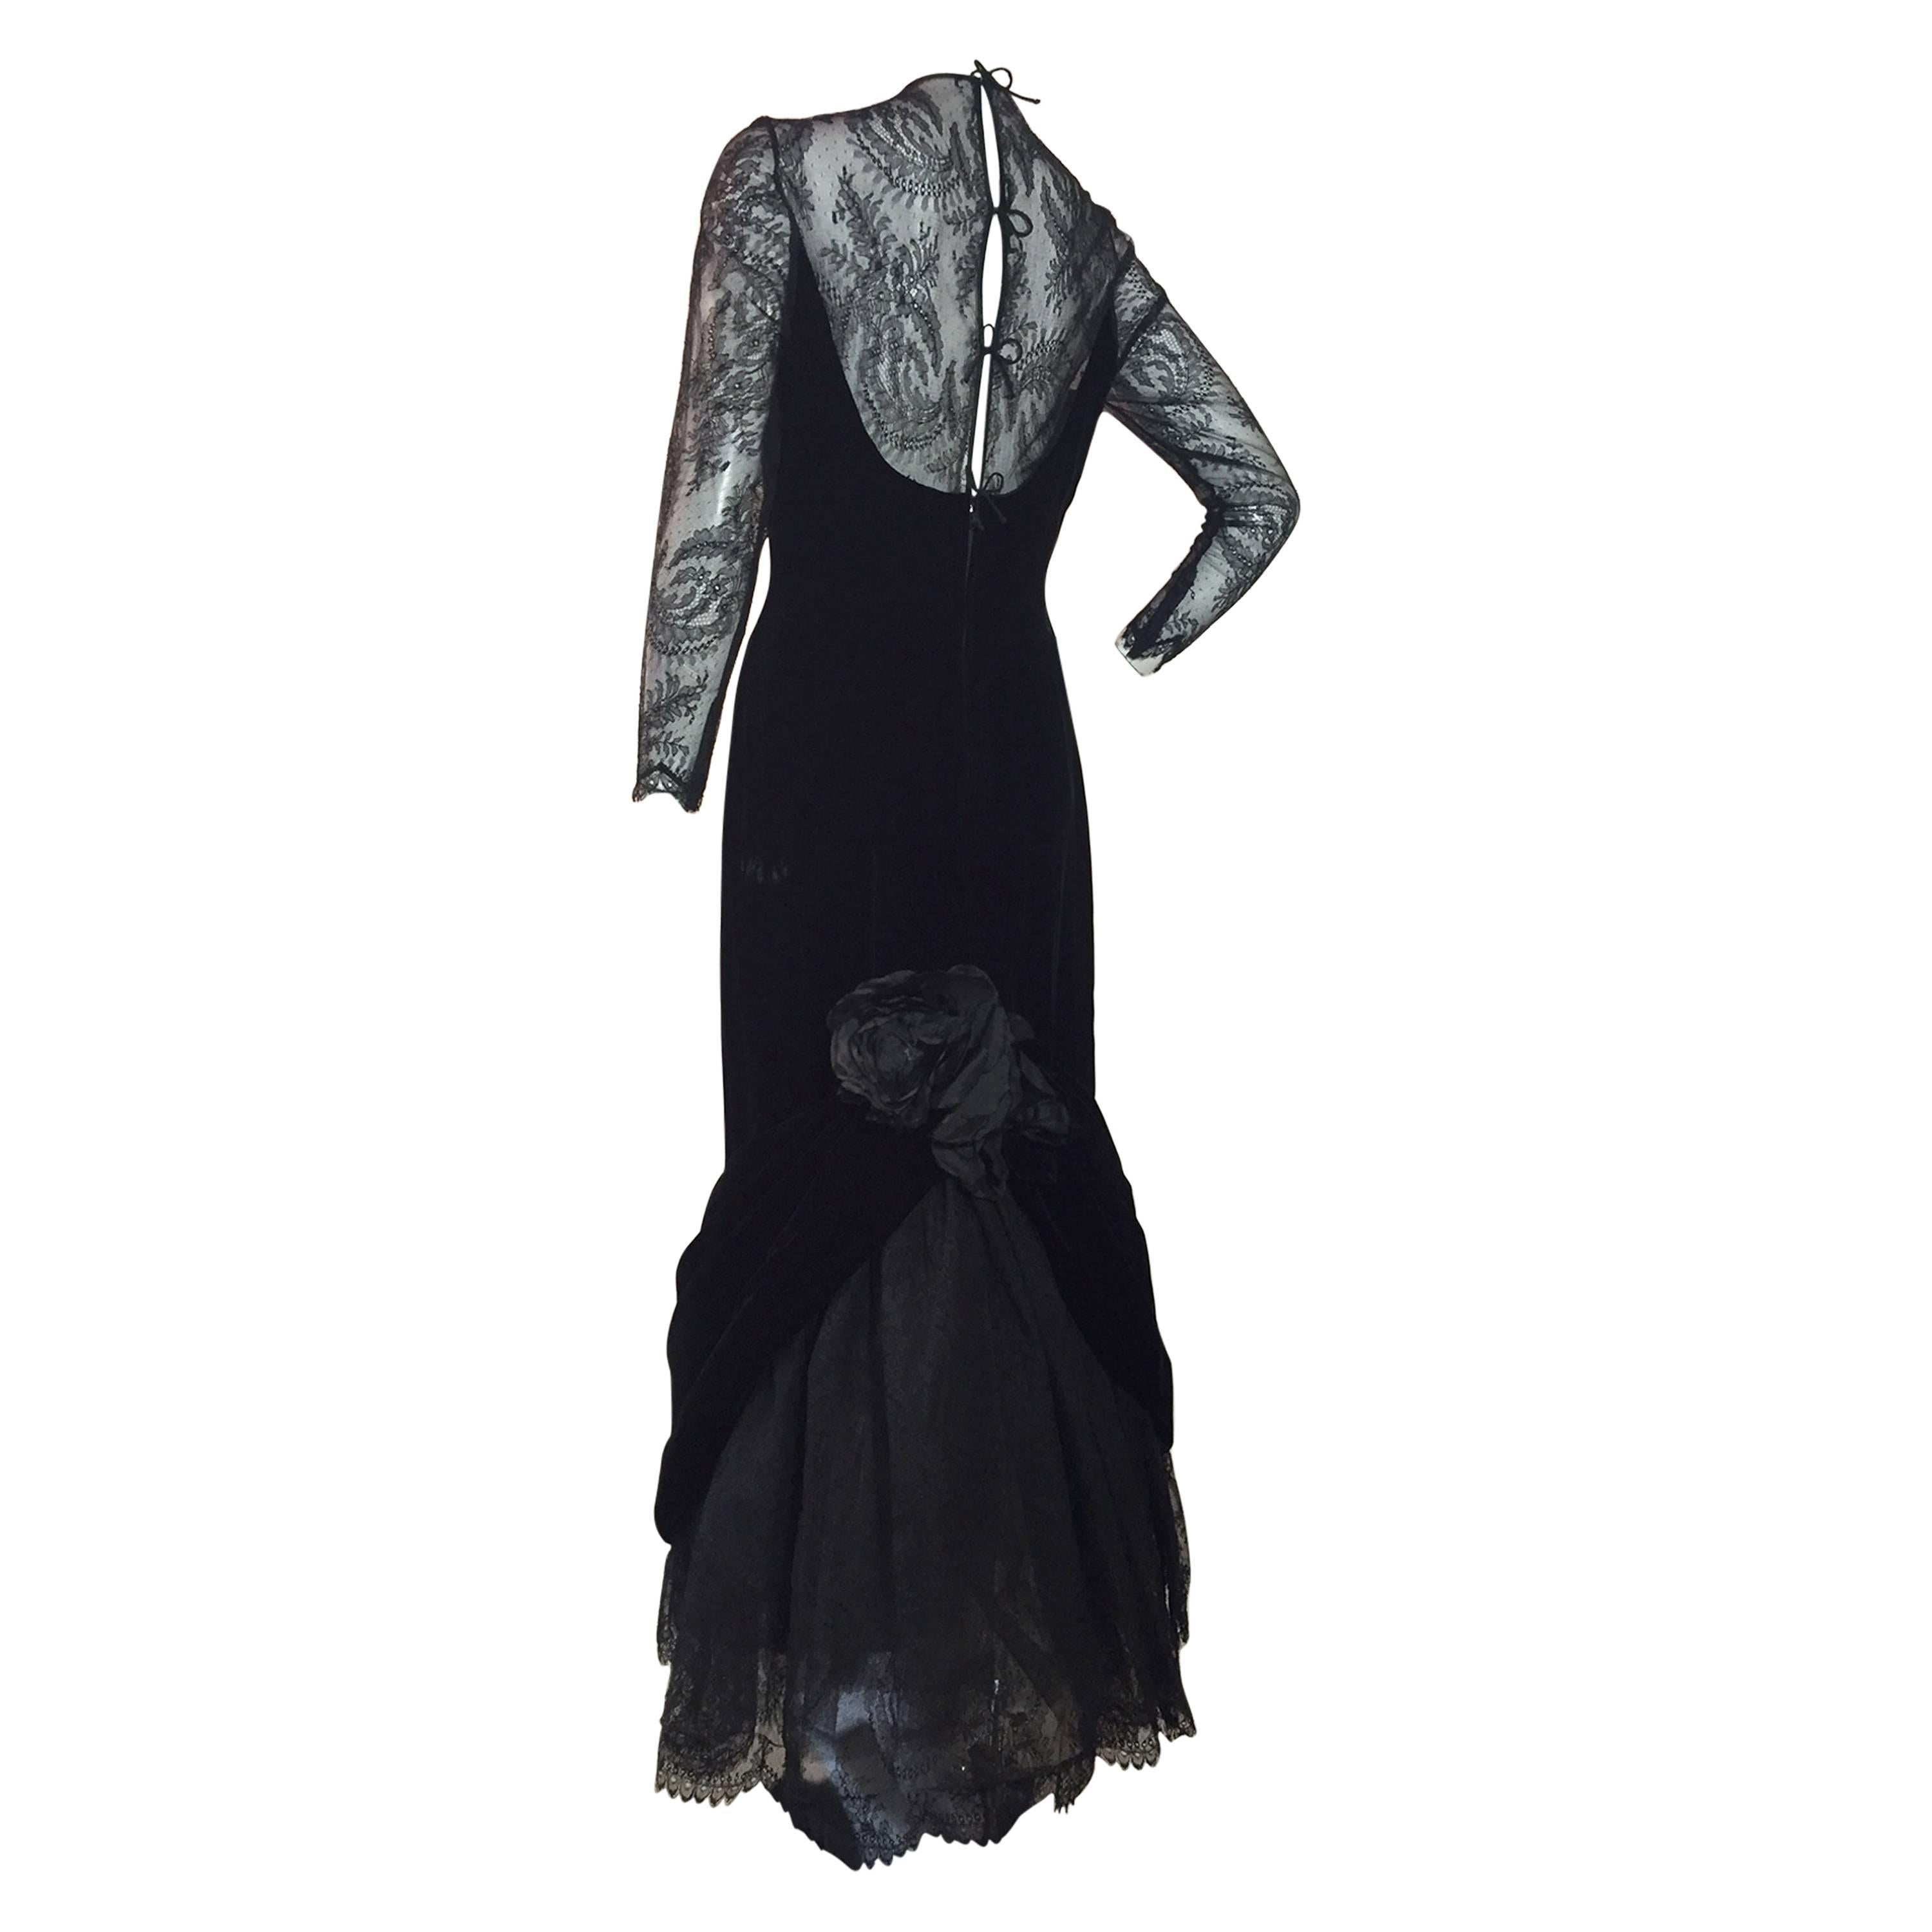 1980s Arnold Scaasi Black Velvet and Chantilly Lace Evening Gown w/ Fishtail Hem